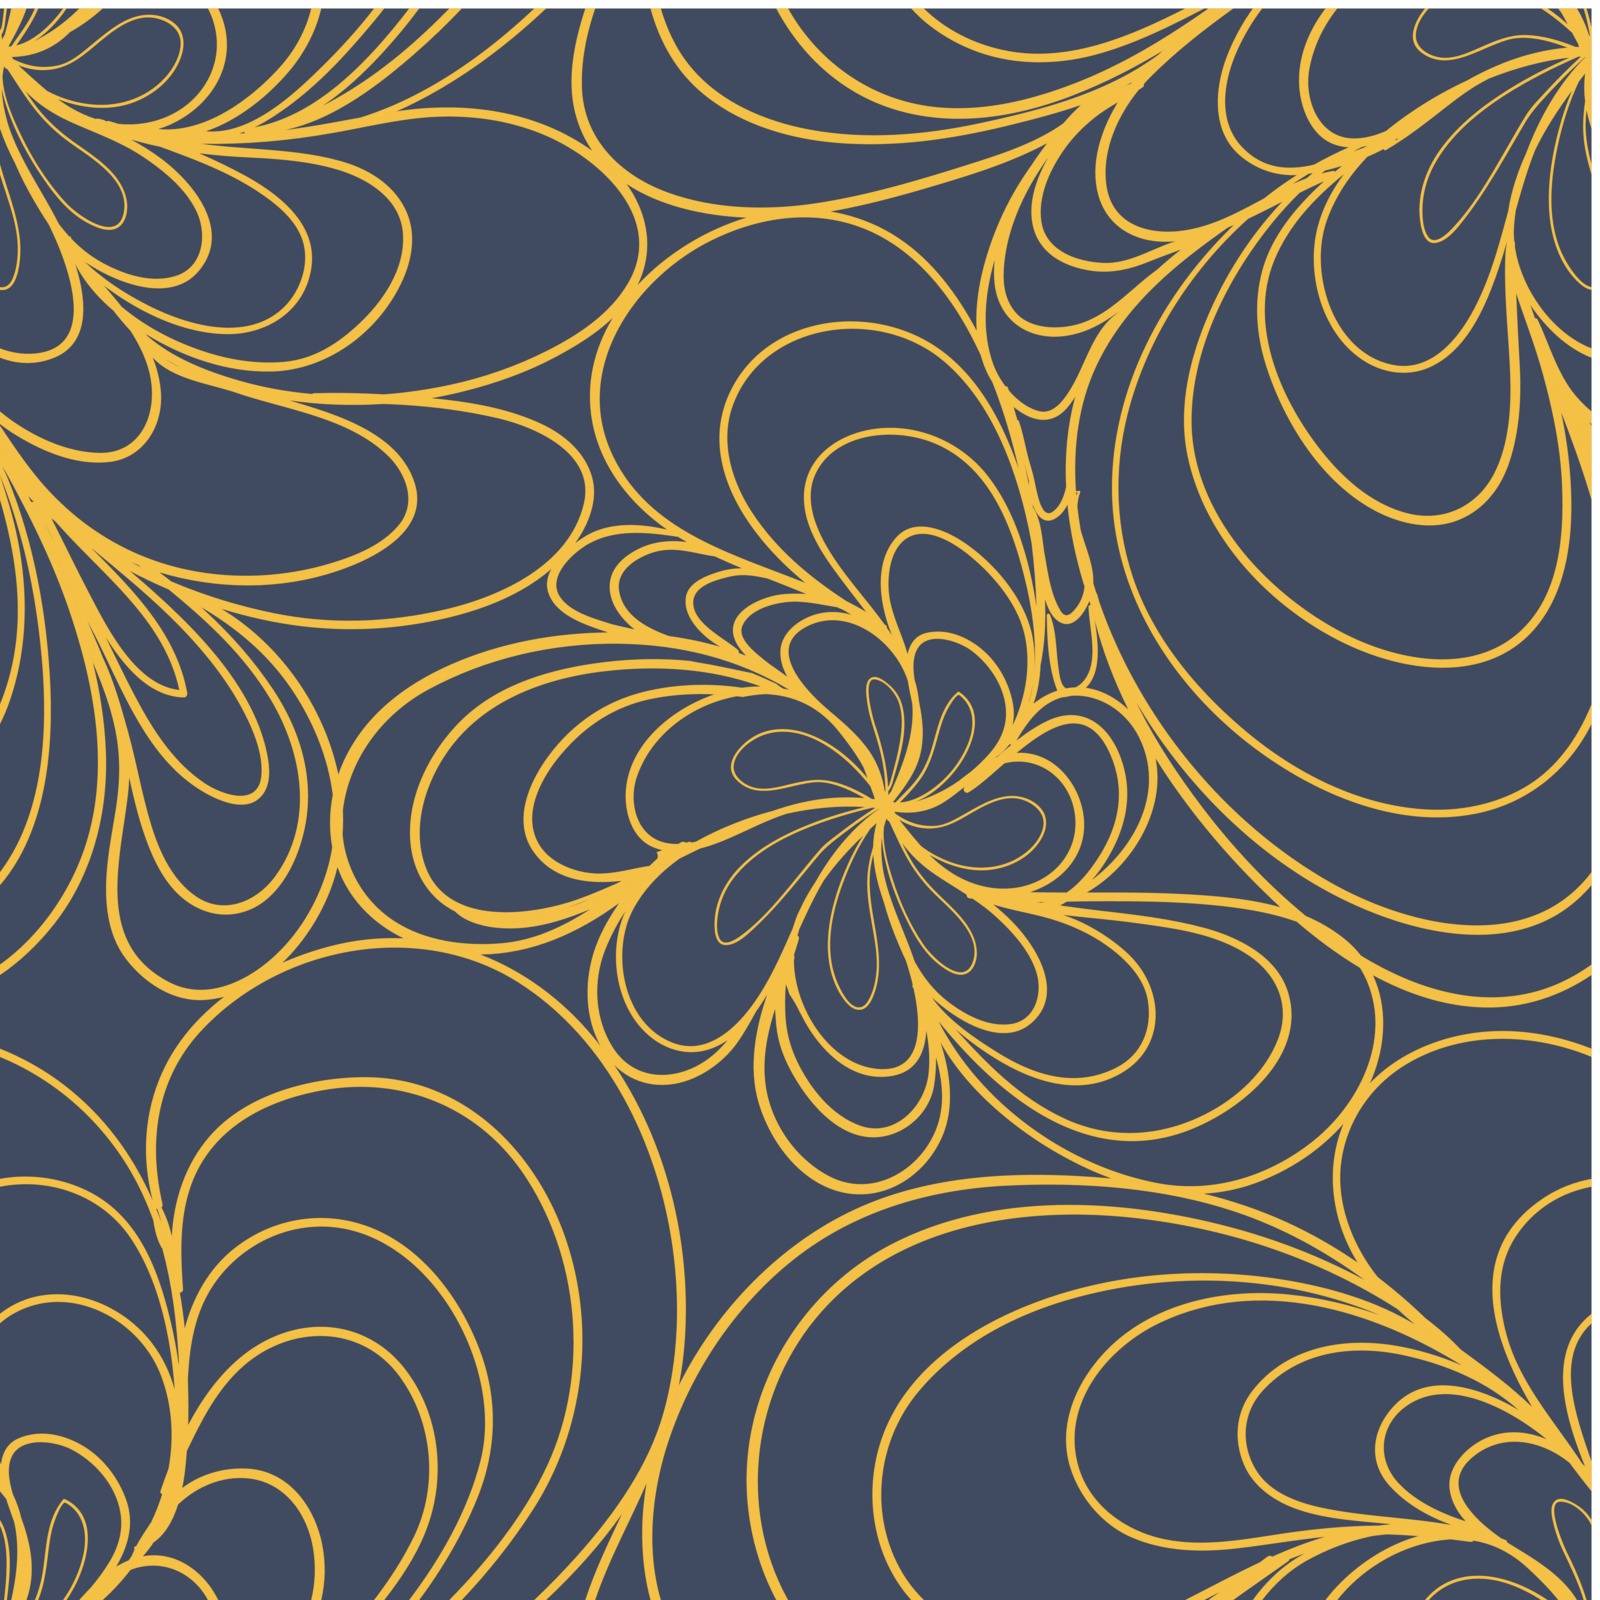 Abstract seamless pattern with simple elements